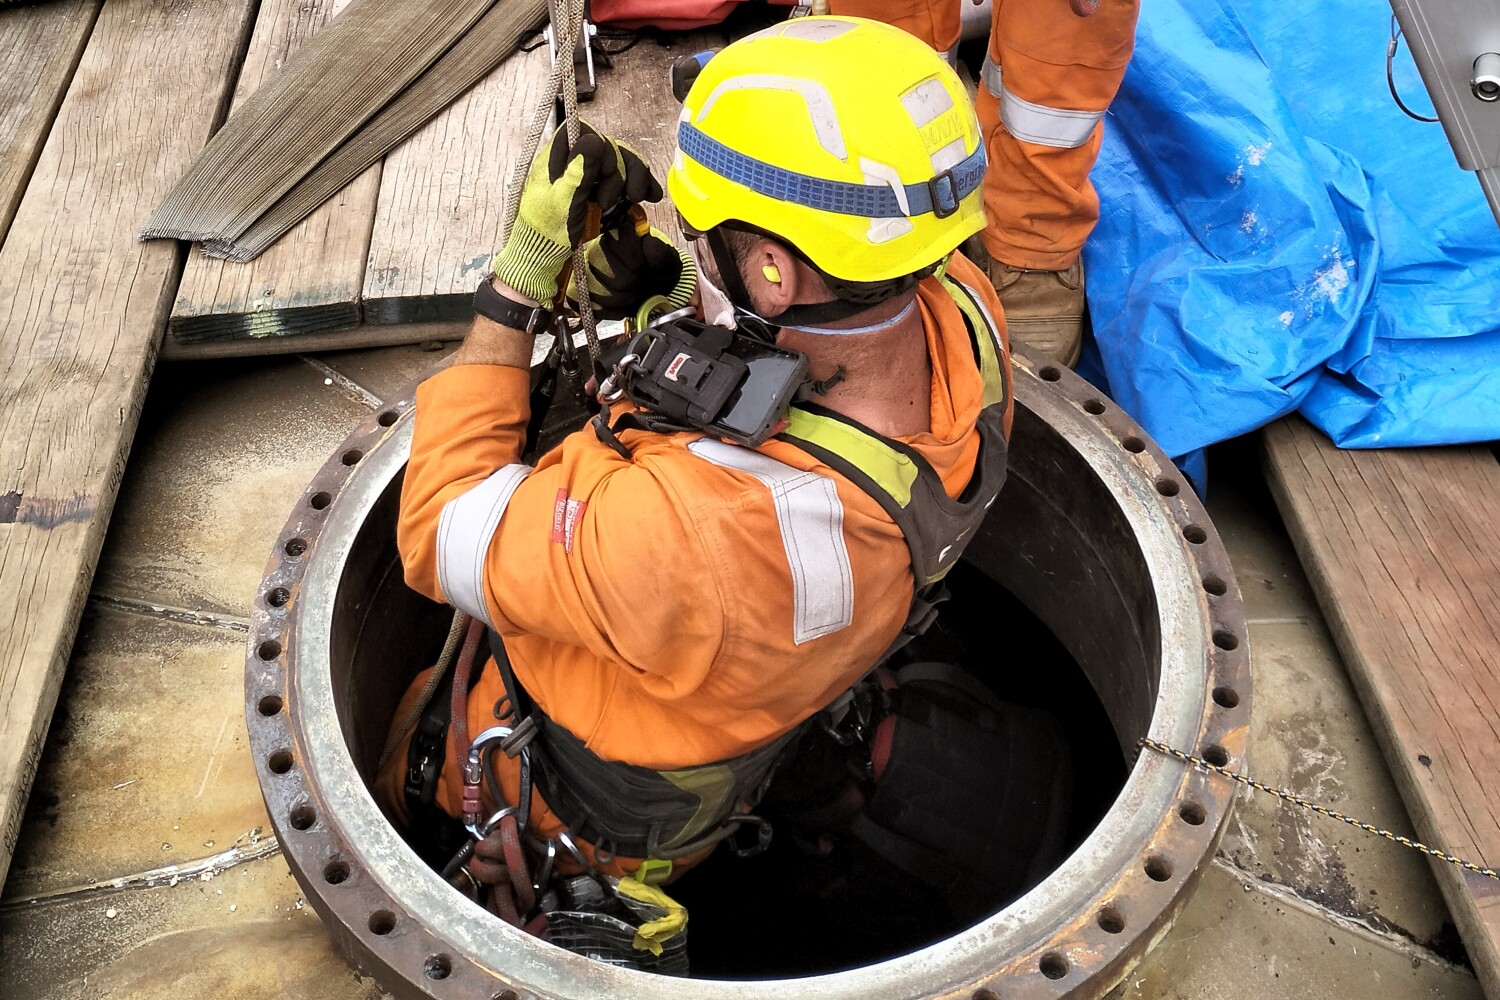 Rope access technician being lowered into a purifier vessel to conduct inspections,